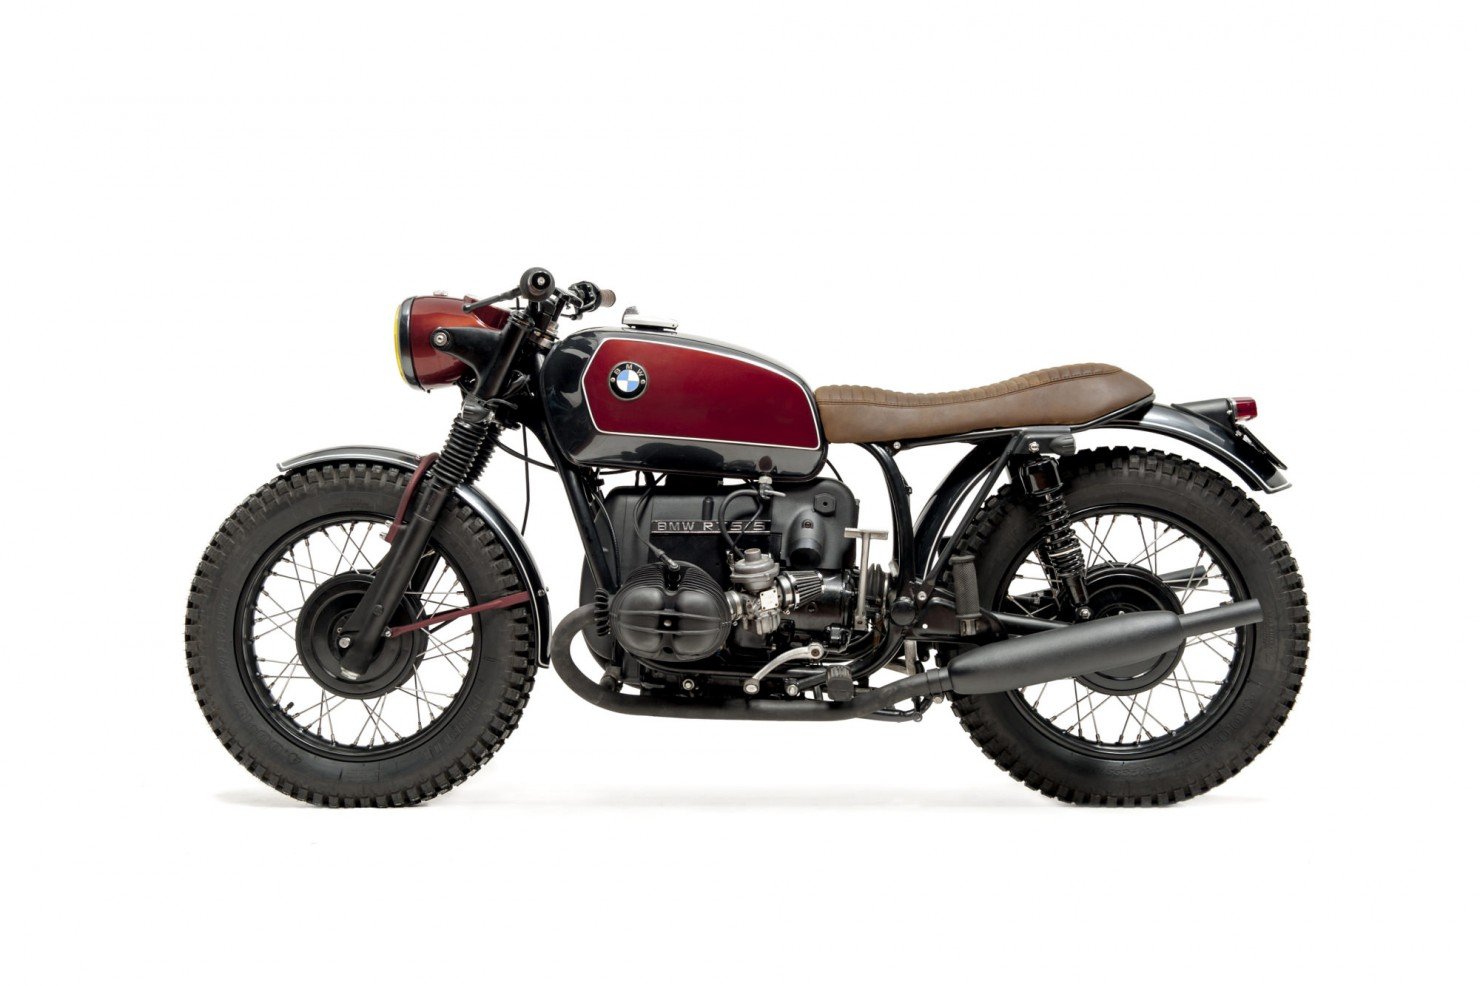 BMW-R755-Motorcycle-1